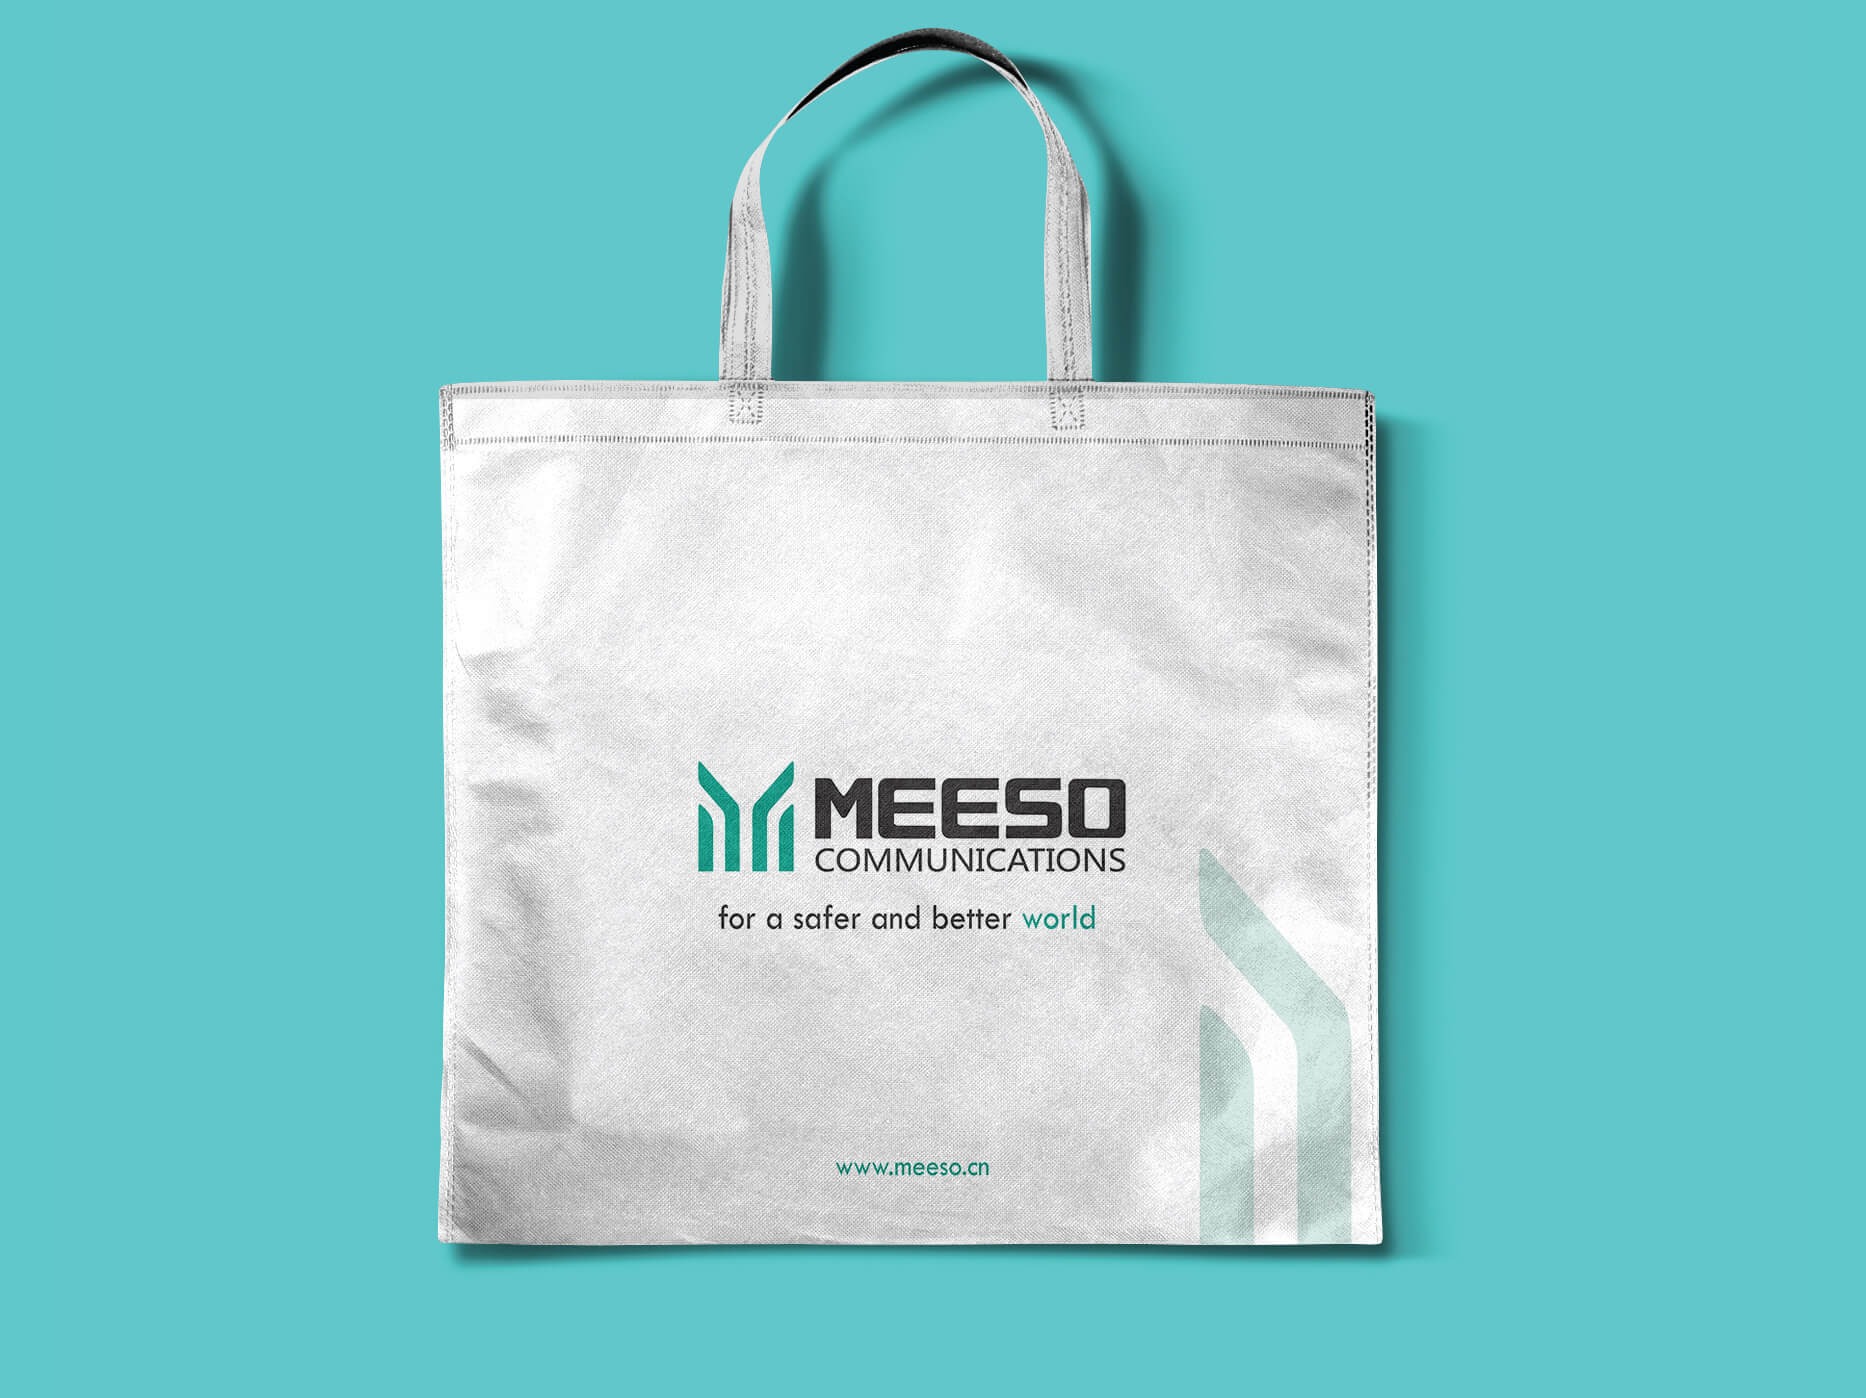 MEESO Communications